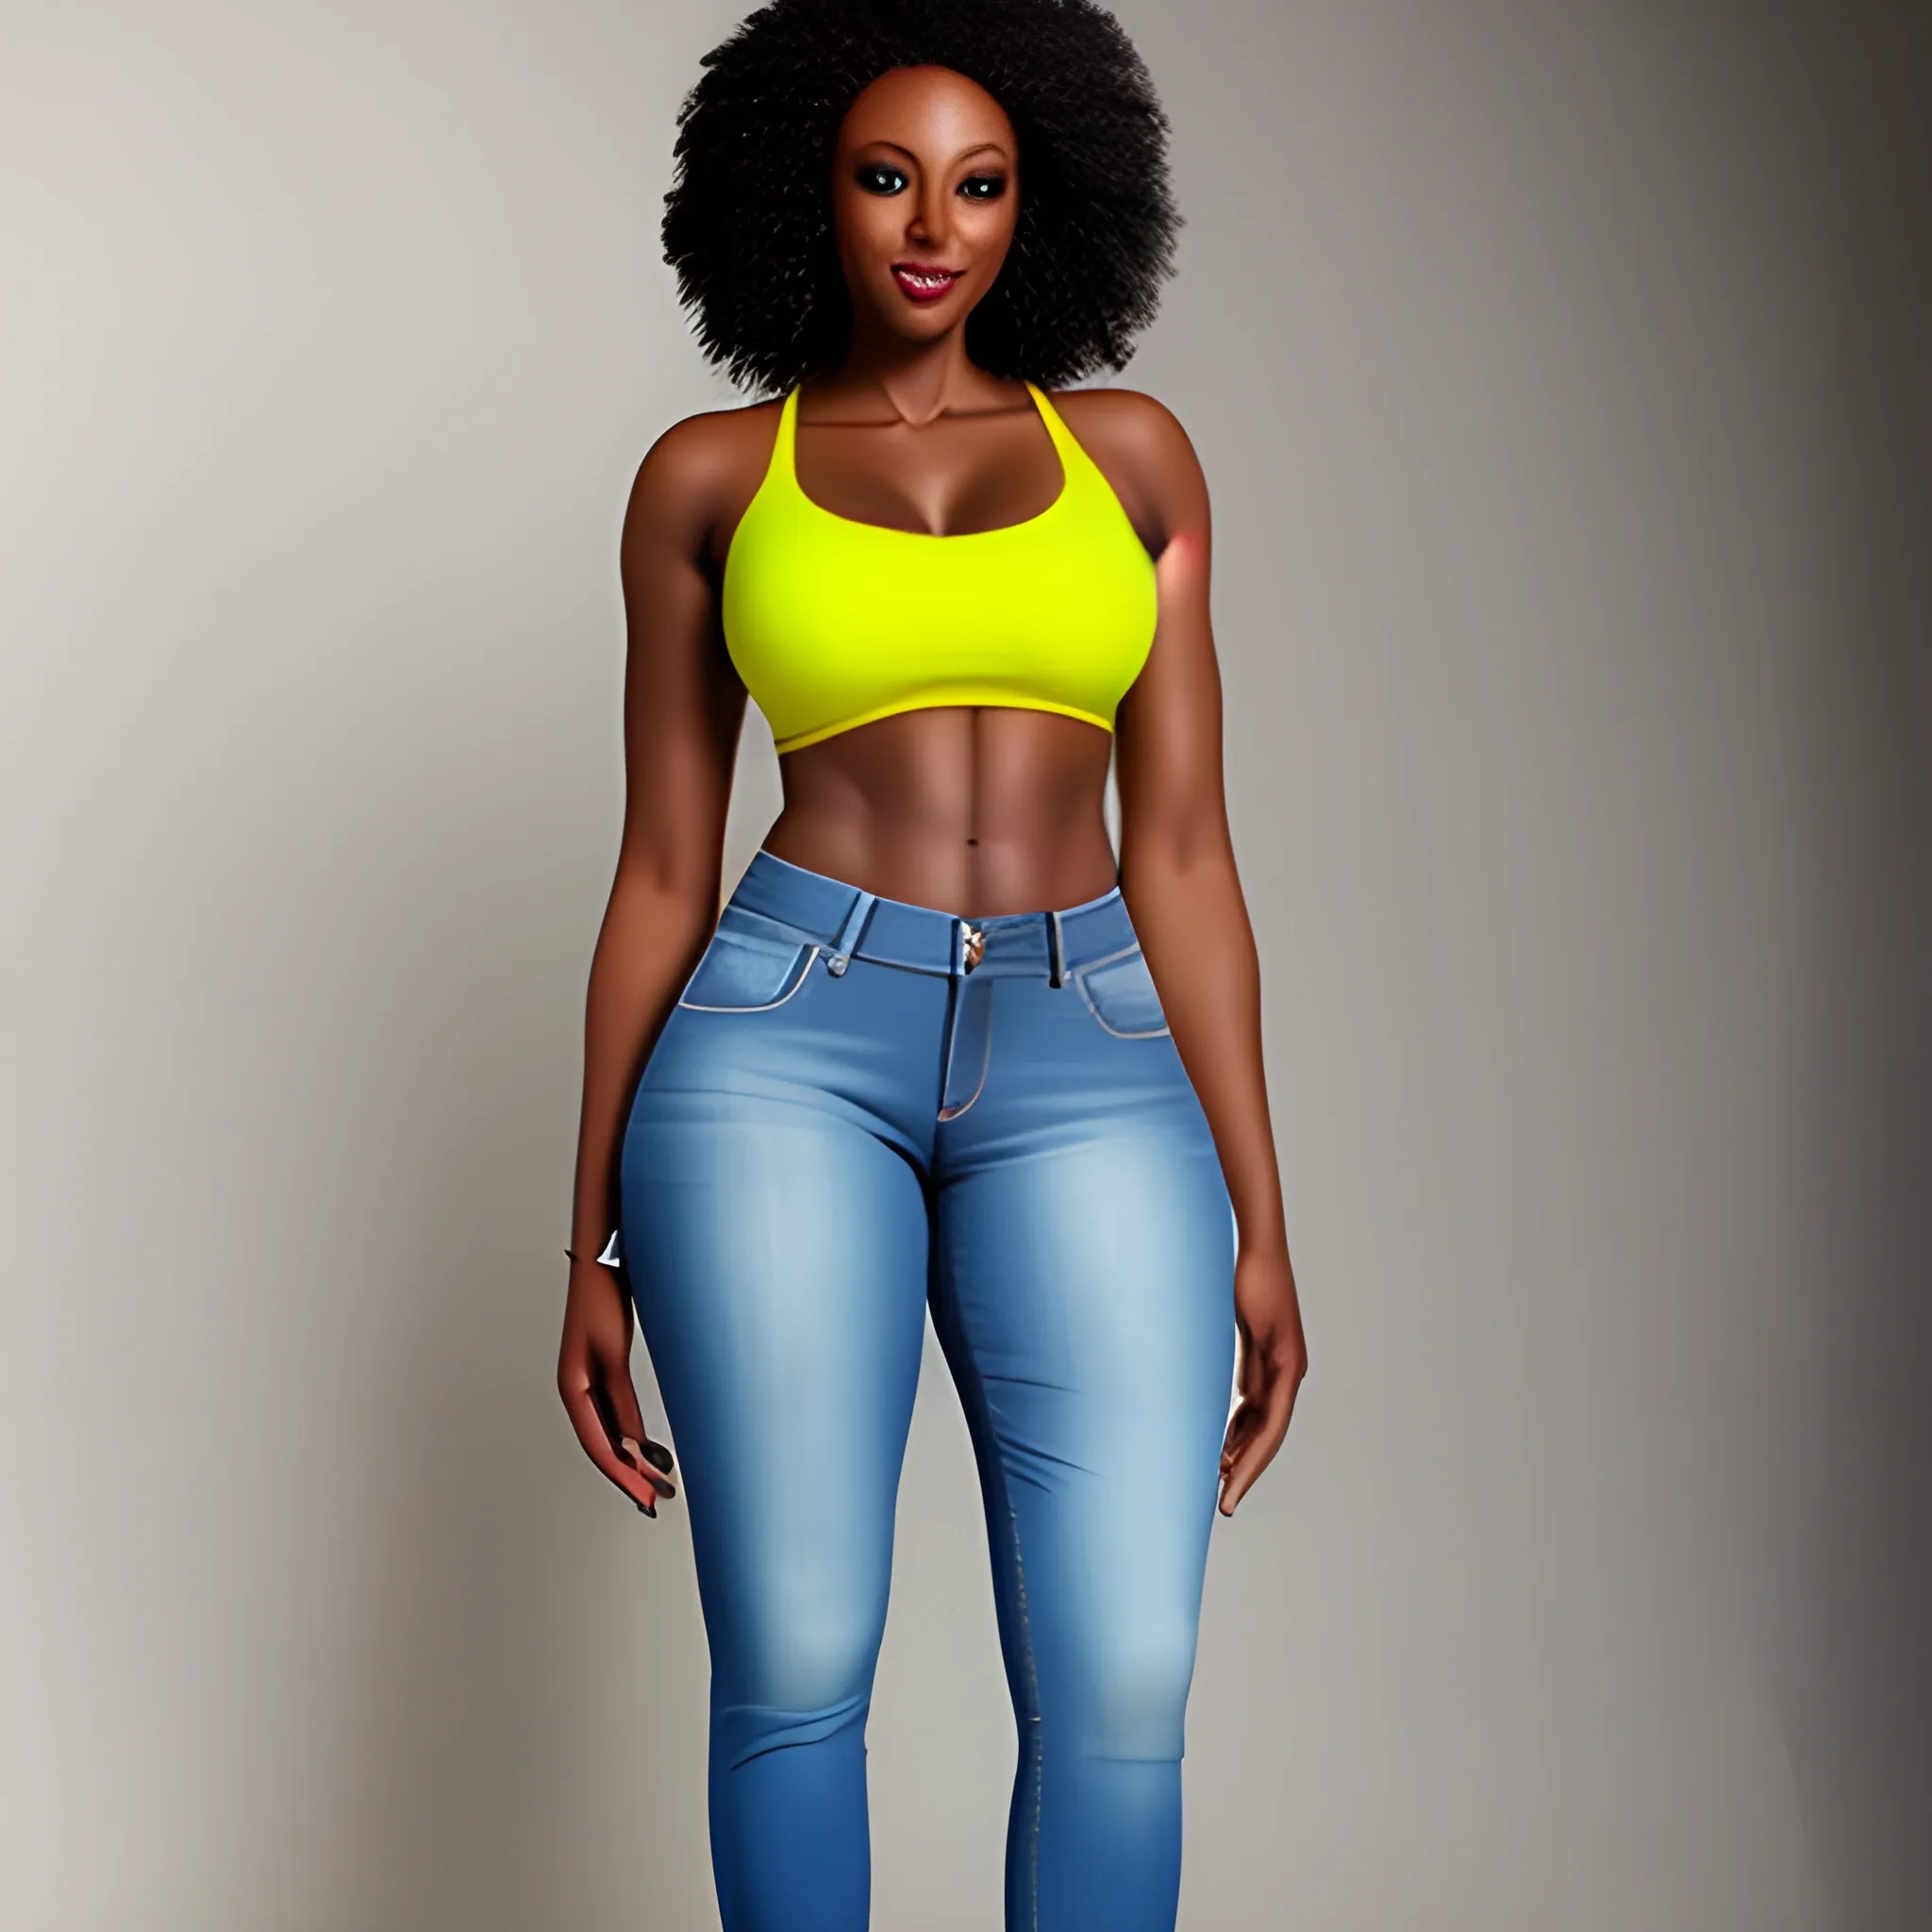 slim african girl with normal legs narrow hips wearing jeans 